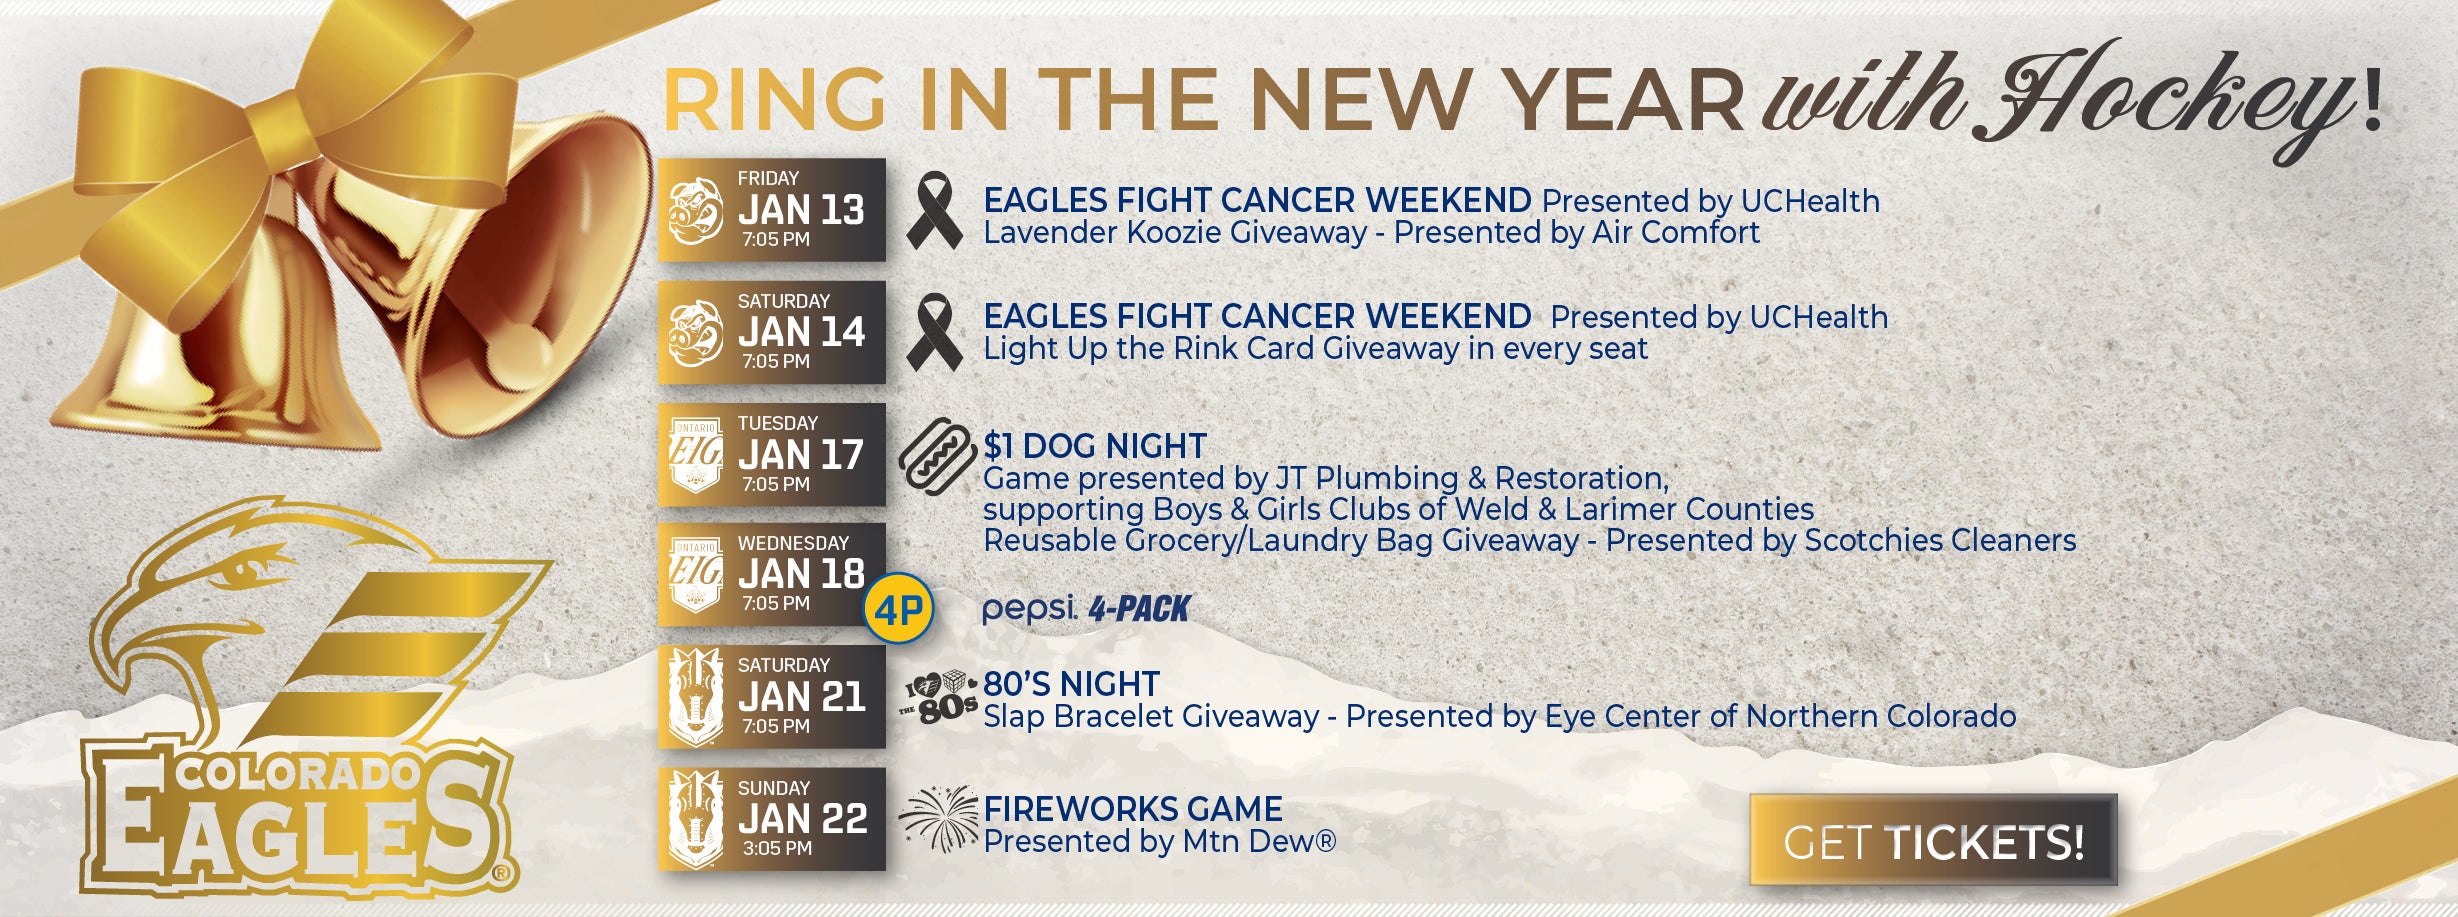 Ring in the New Year with Hockey!